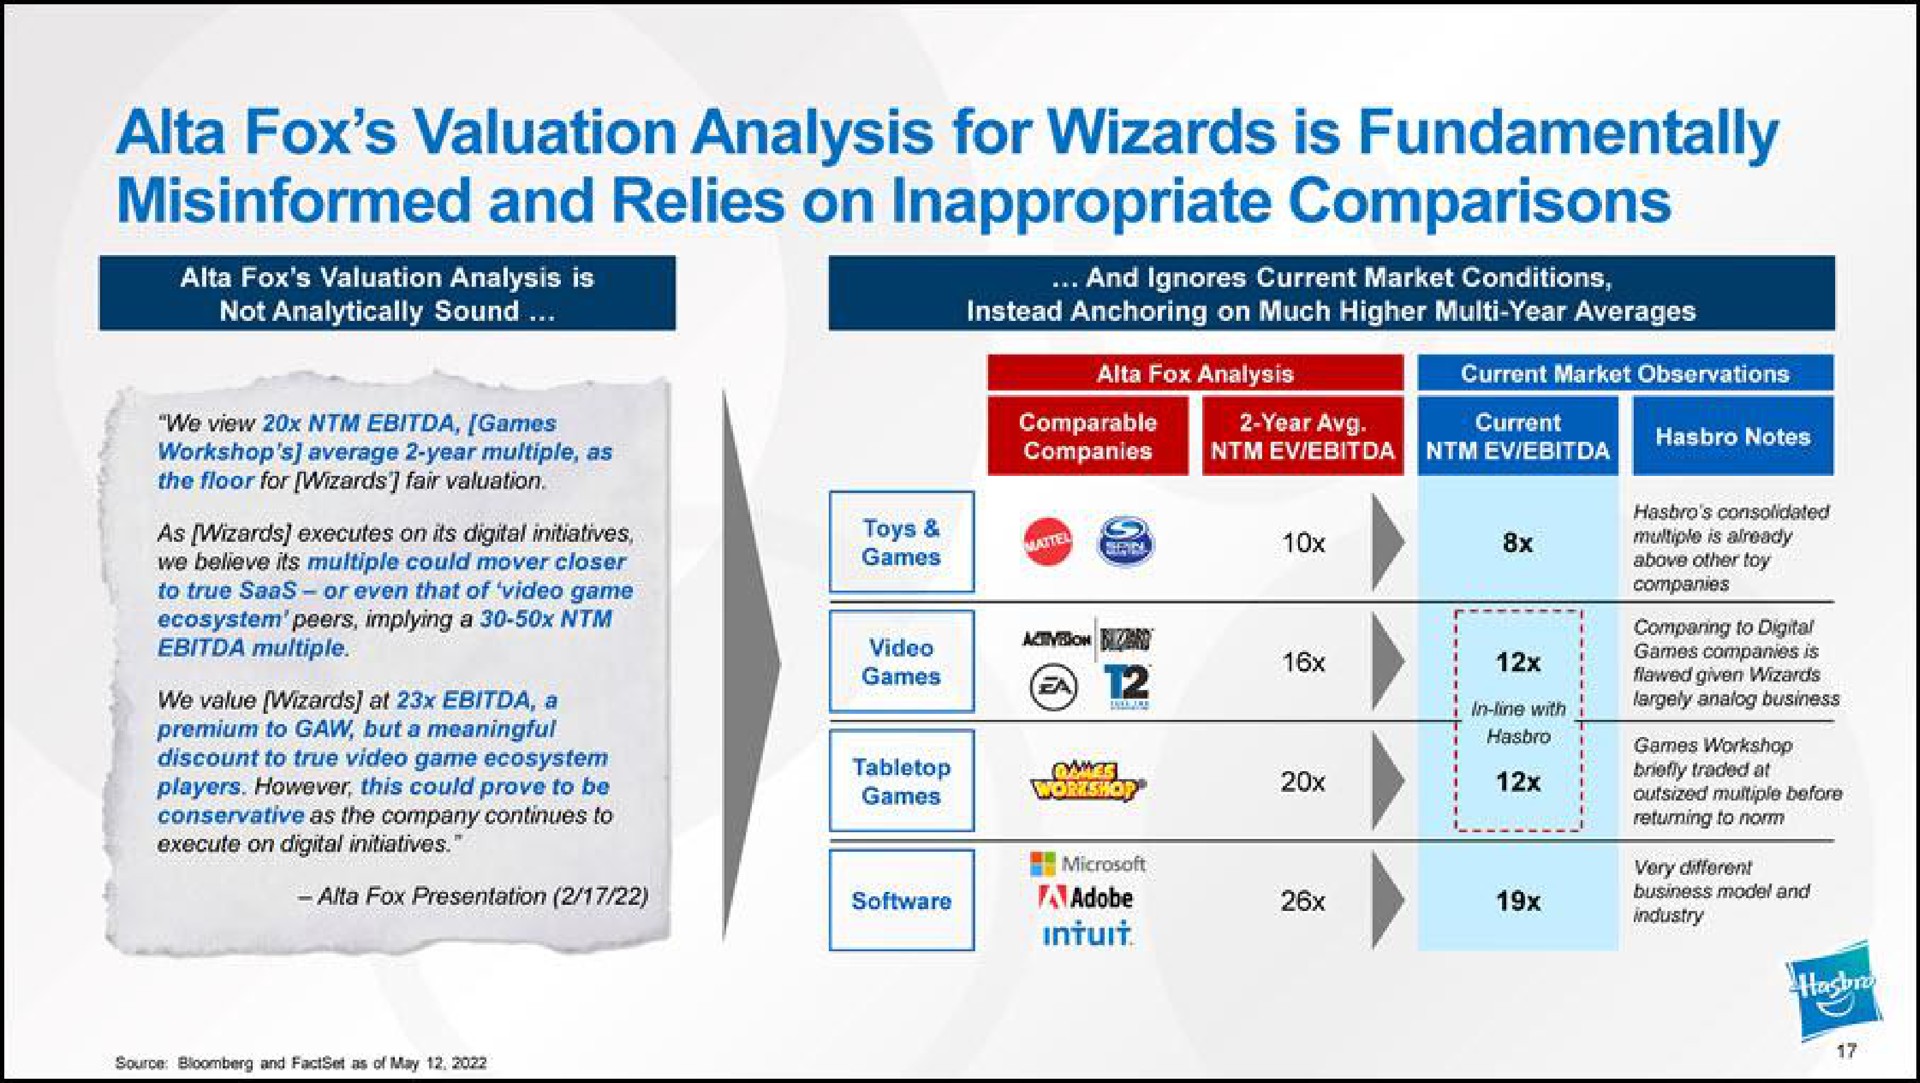 fox valuation analysis for wizards is fundamentally misinformed and relies on inappropriate comparisons toys intuit ree multiple is already | Hasbro